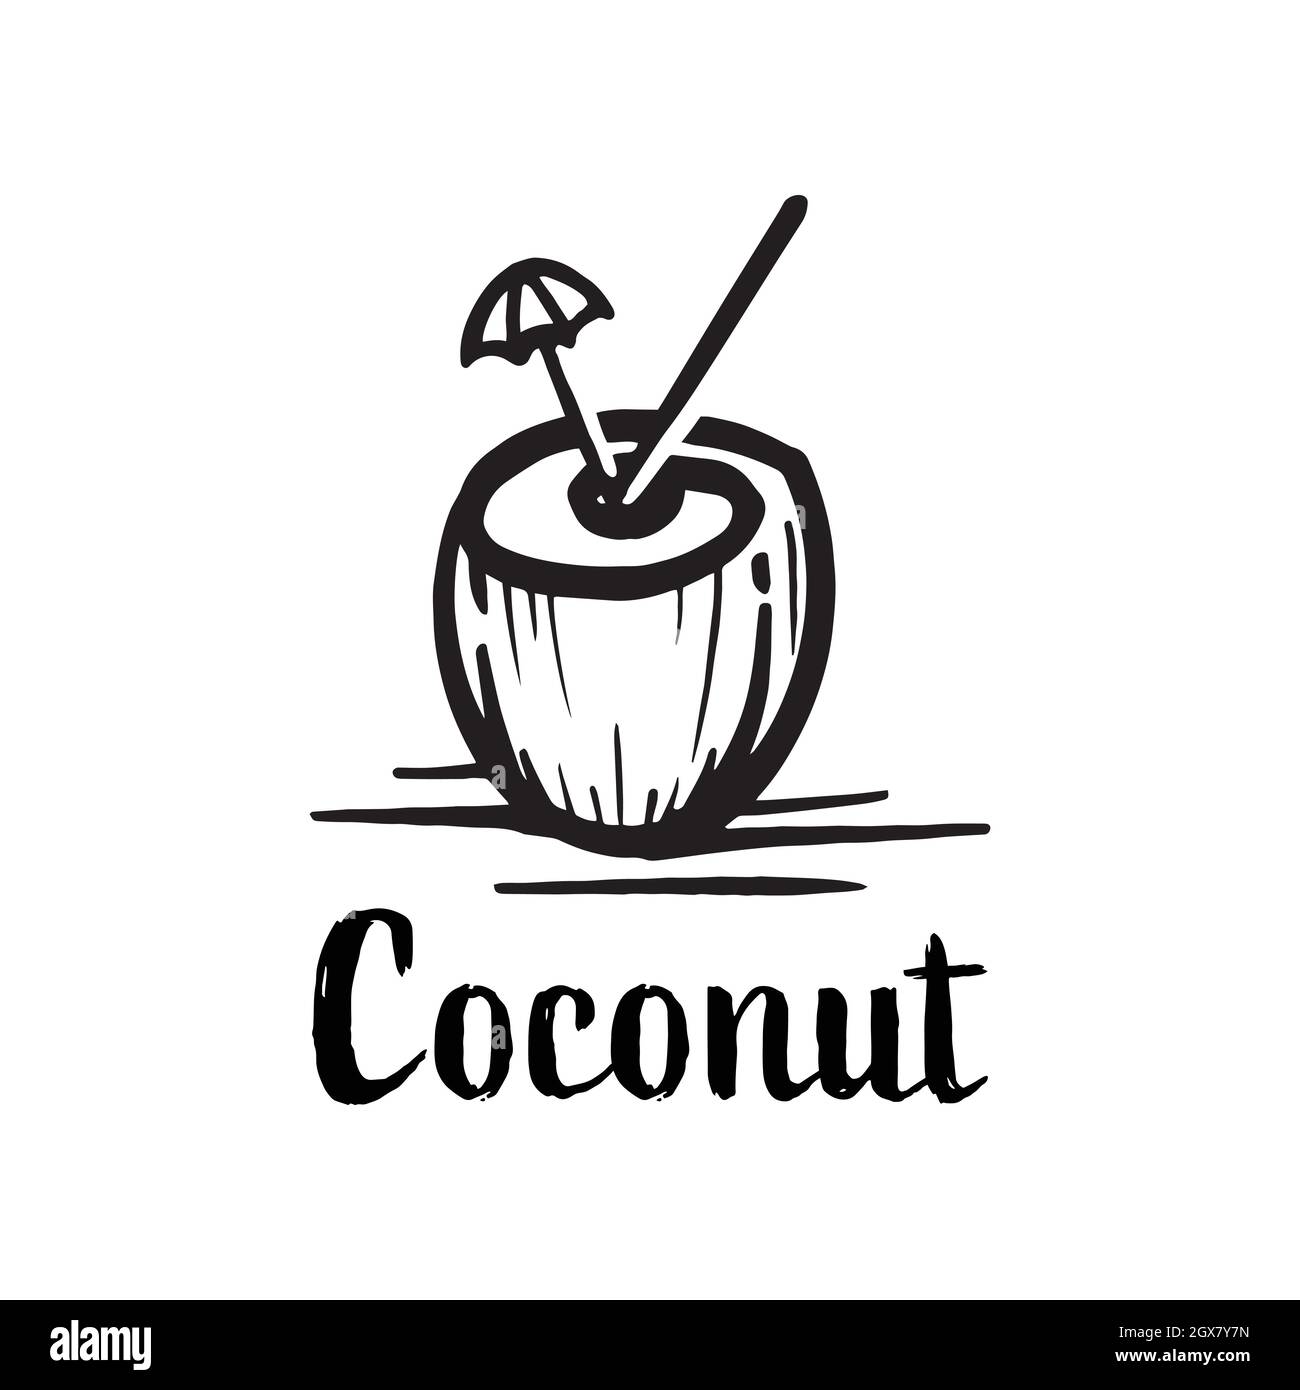 coconut drink logo silhouette. coconut cocktail hand drawn natural drink symbol Stock Vector